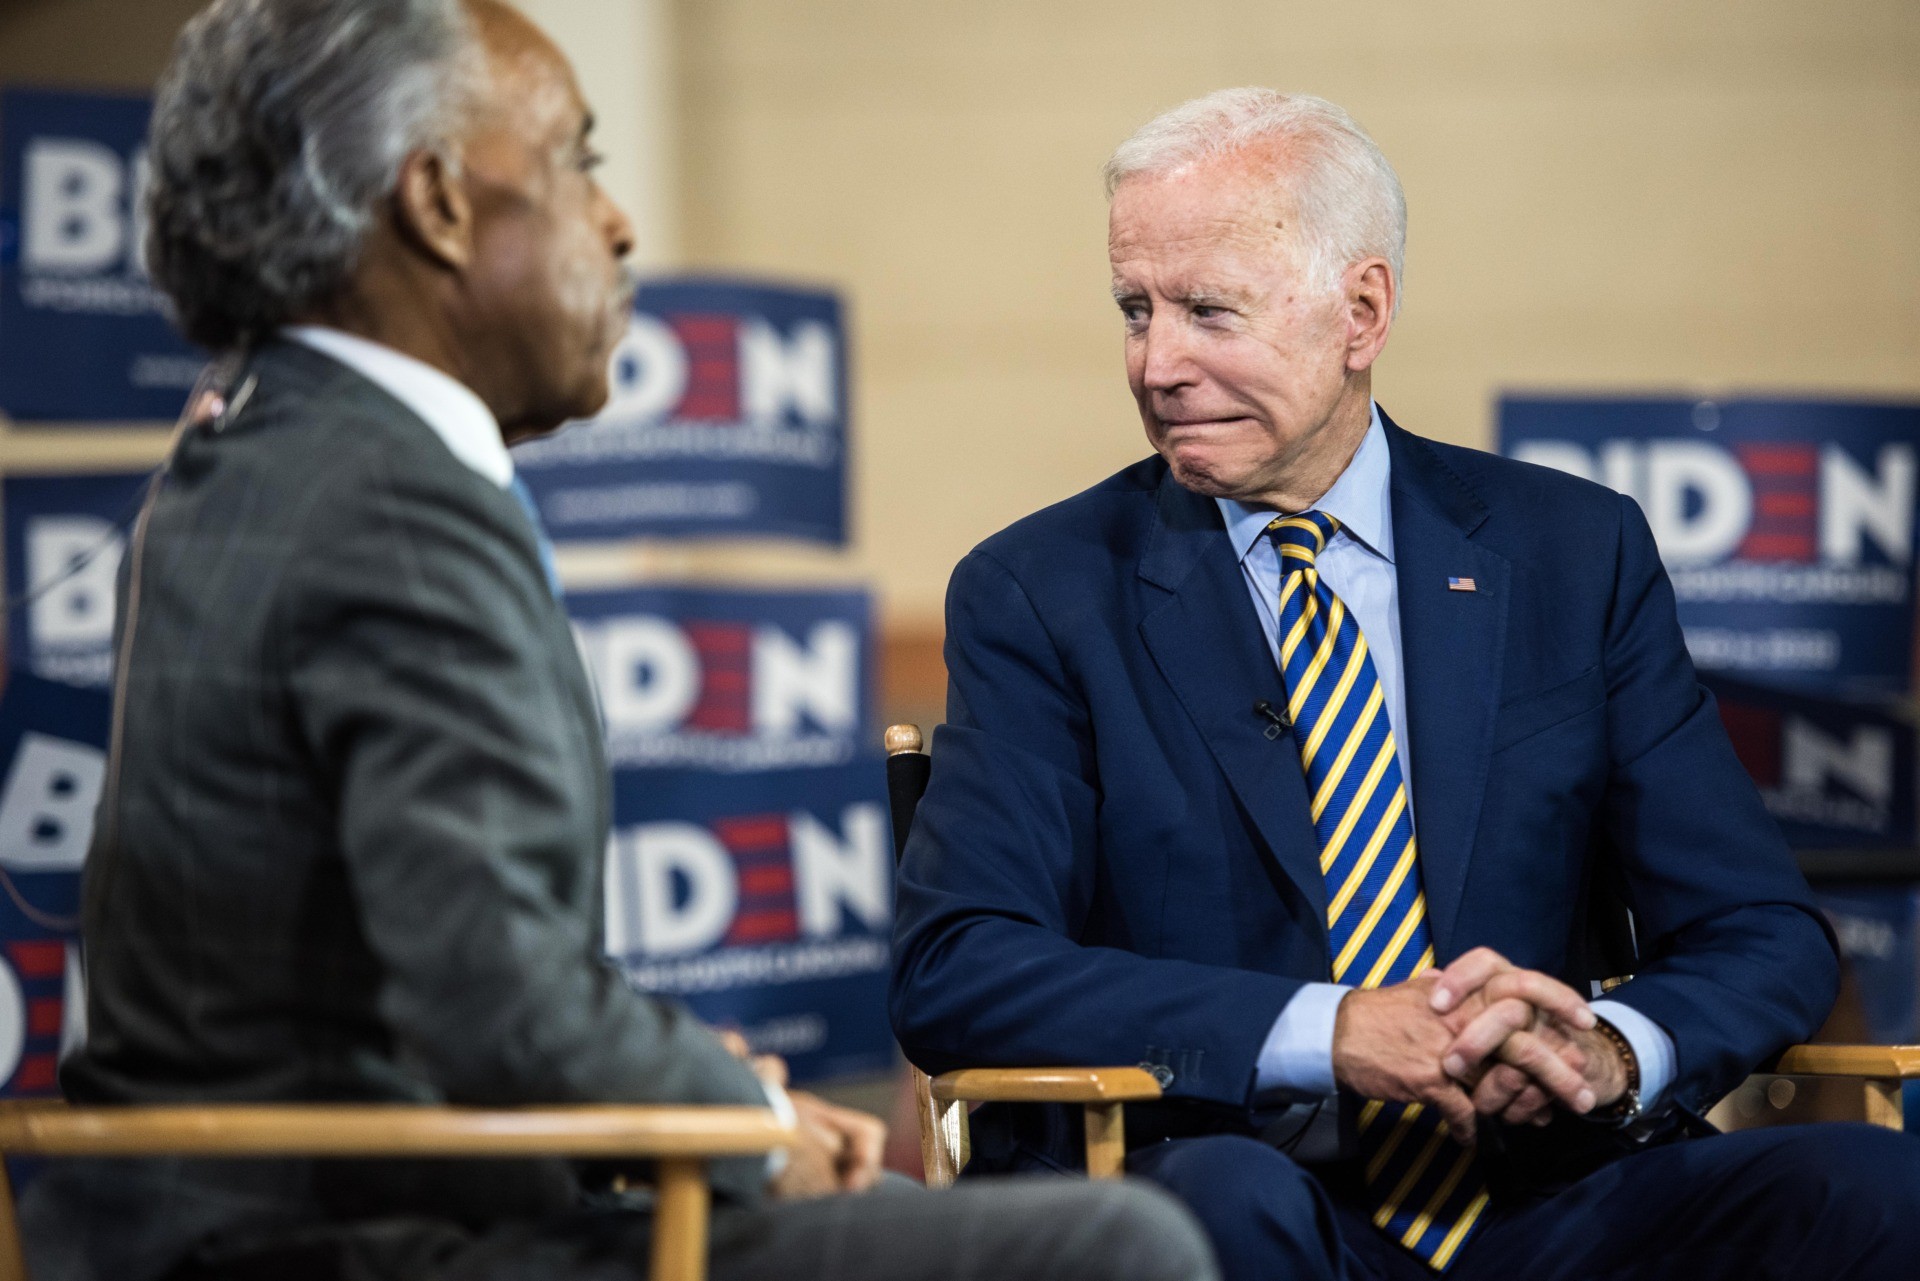 COLUMBIA, SC - JUNE 22: Democratic presidential candidate, former Vice President Joe Biden looks to his supporters after a television interview with Al Sharpton during the 2019 South Carolina Democratic Party State Convention on June 22, 2019 in Columbia, South Carolina. Democratic presidential hopefuls are converging on South Carolina this weekend for a host of events where the candidates can directly address an important voting bloc in the Democratic primary. (Photo by Sean Rayford/Getty Images)